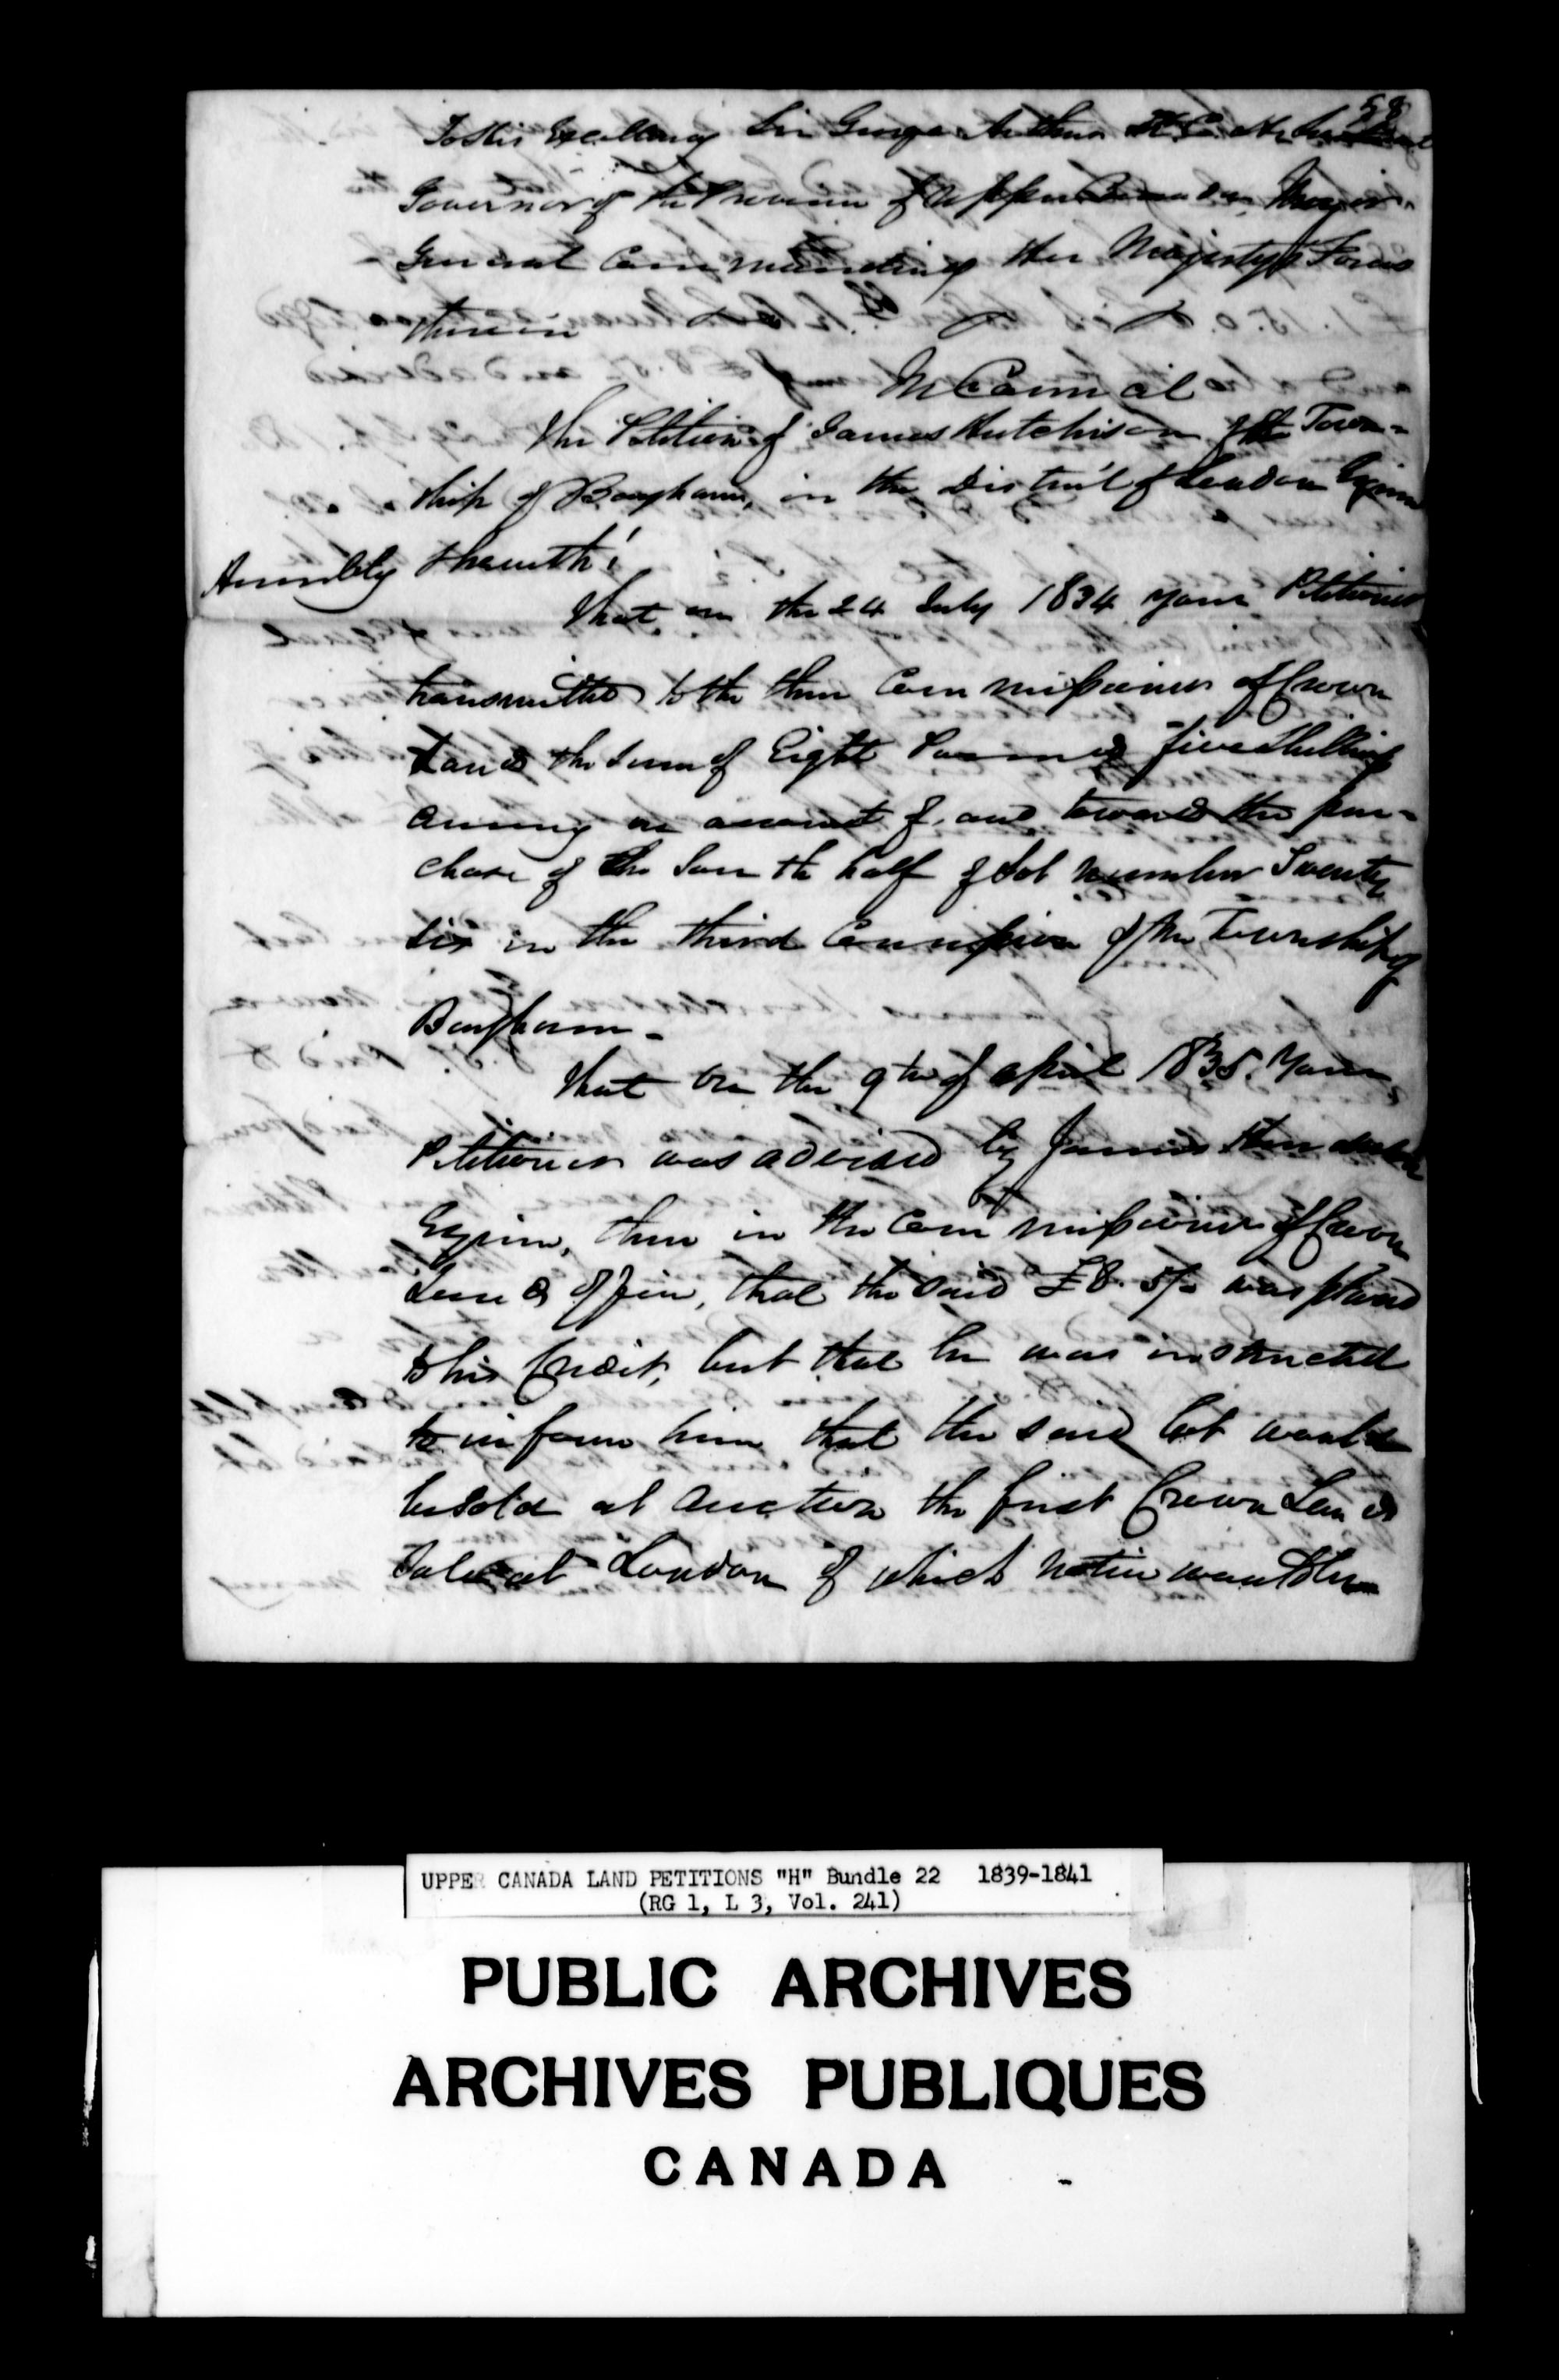 Title: Upper Canada Land Petitions (1763-1865) - Mikan Number: 205131 - Microform: c-2097